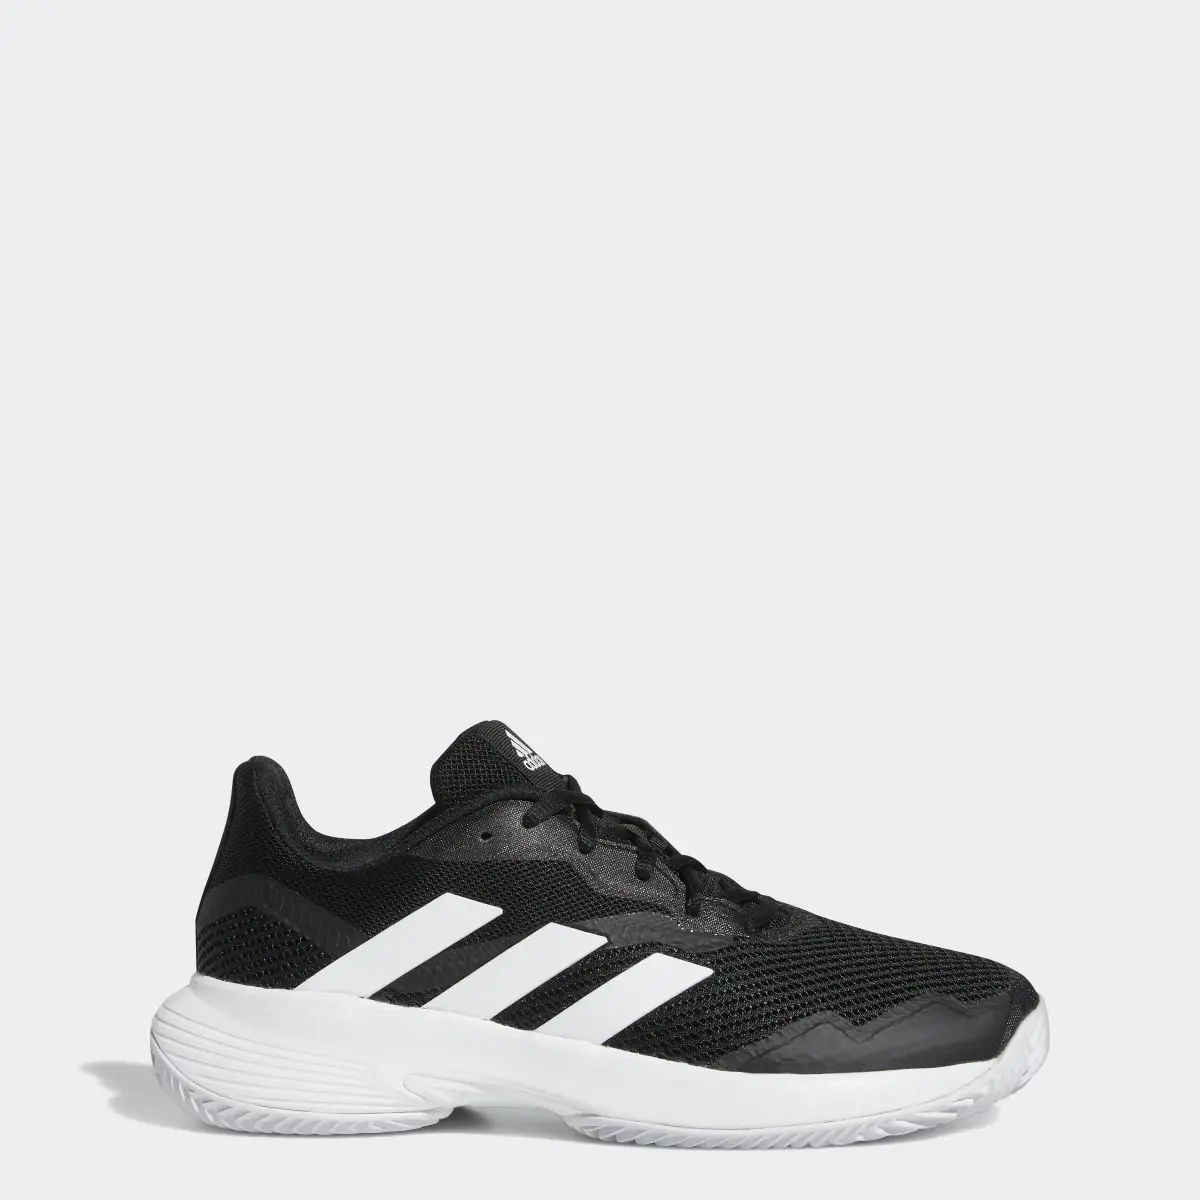 Adidas CourtJam Control Clay Tennis Shoes. 1